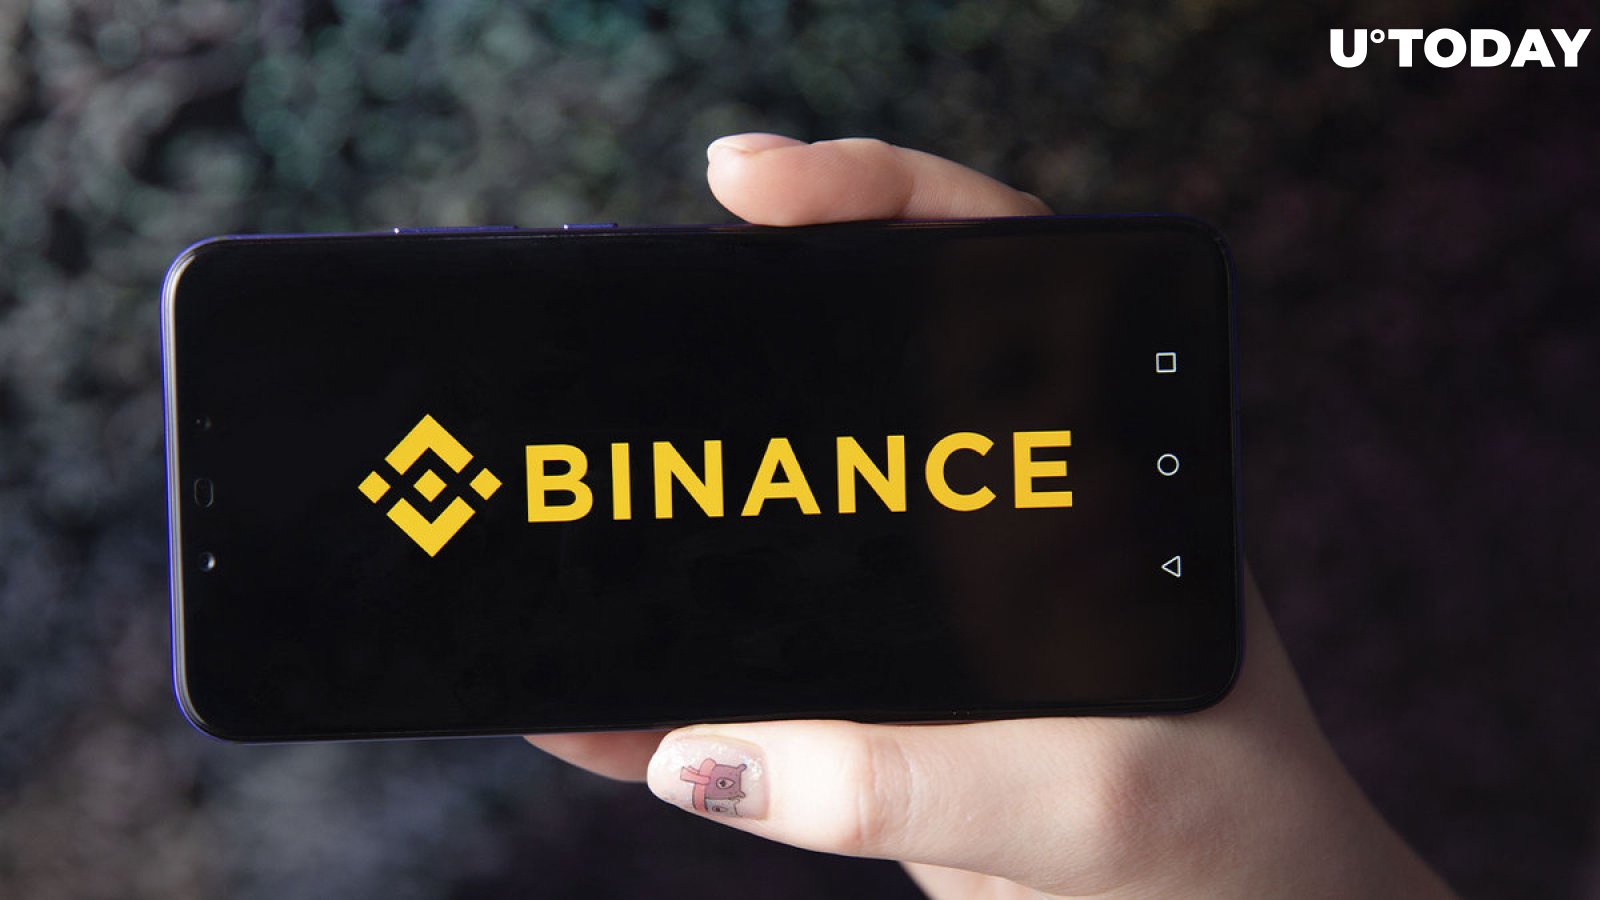 New Binance CEO? Exchange Calls Bloomberg's Claims 'Speculation'